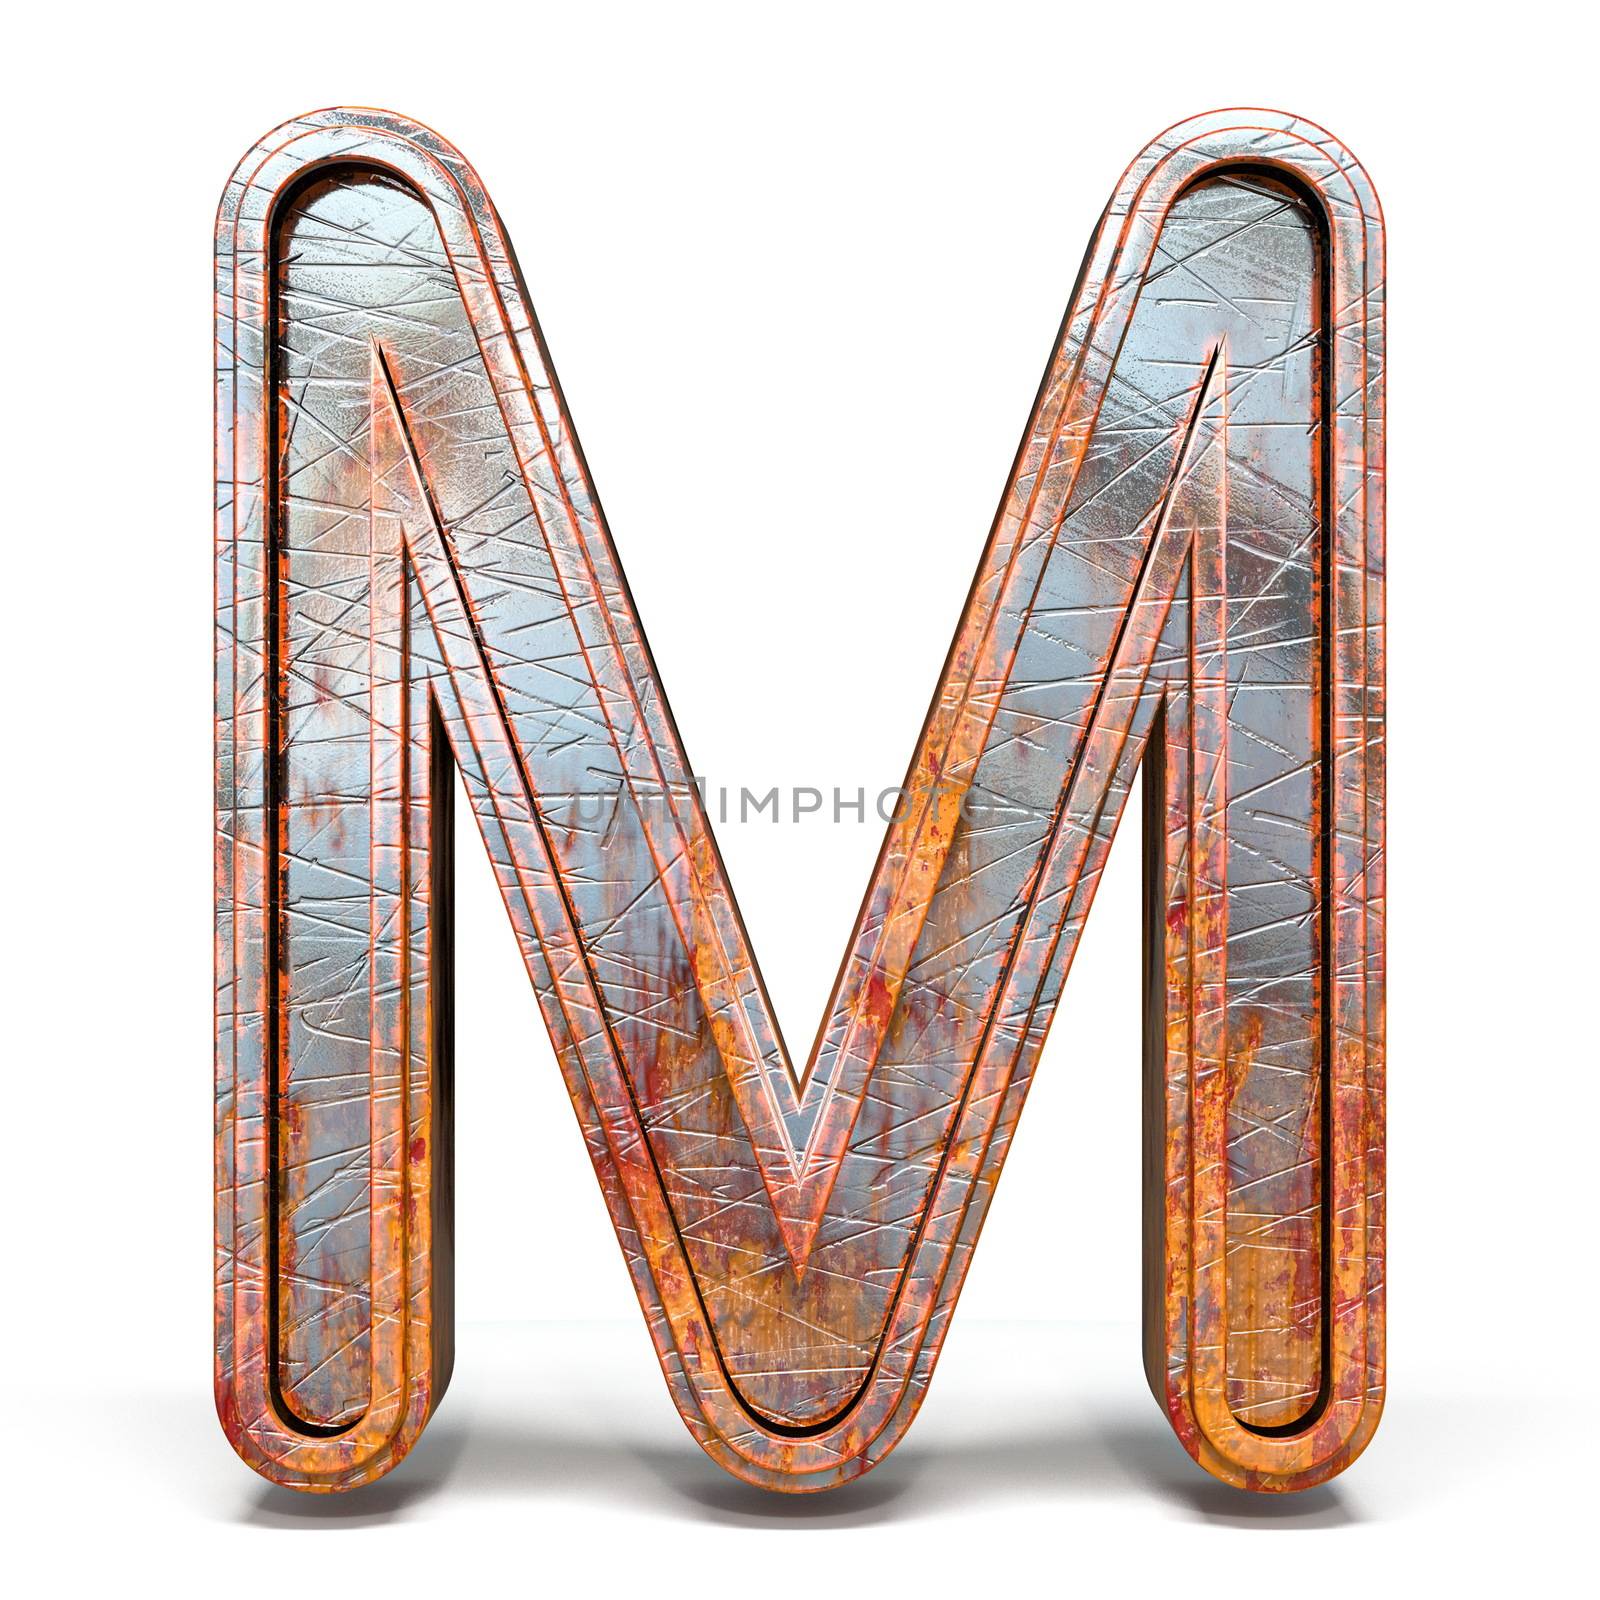 Rusty metal font Letter M 3D render illustration isolated on white background